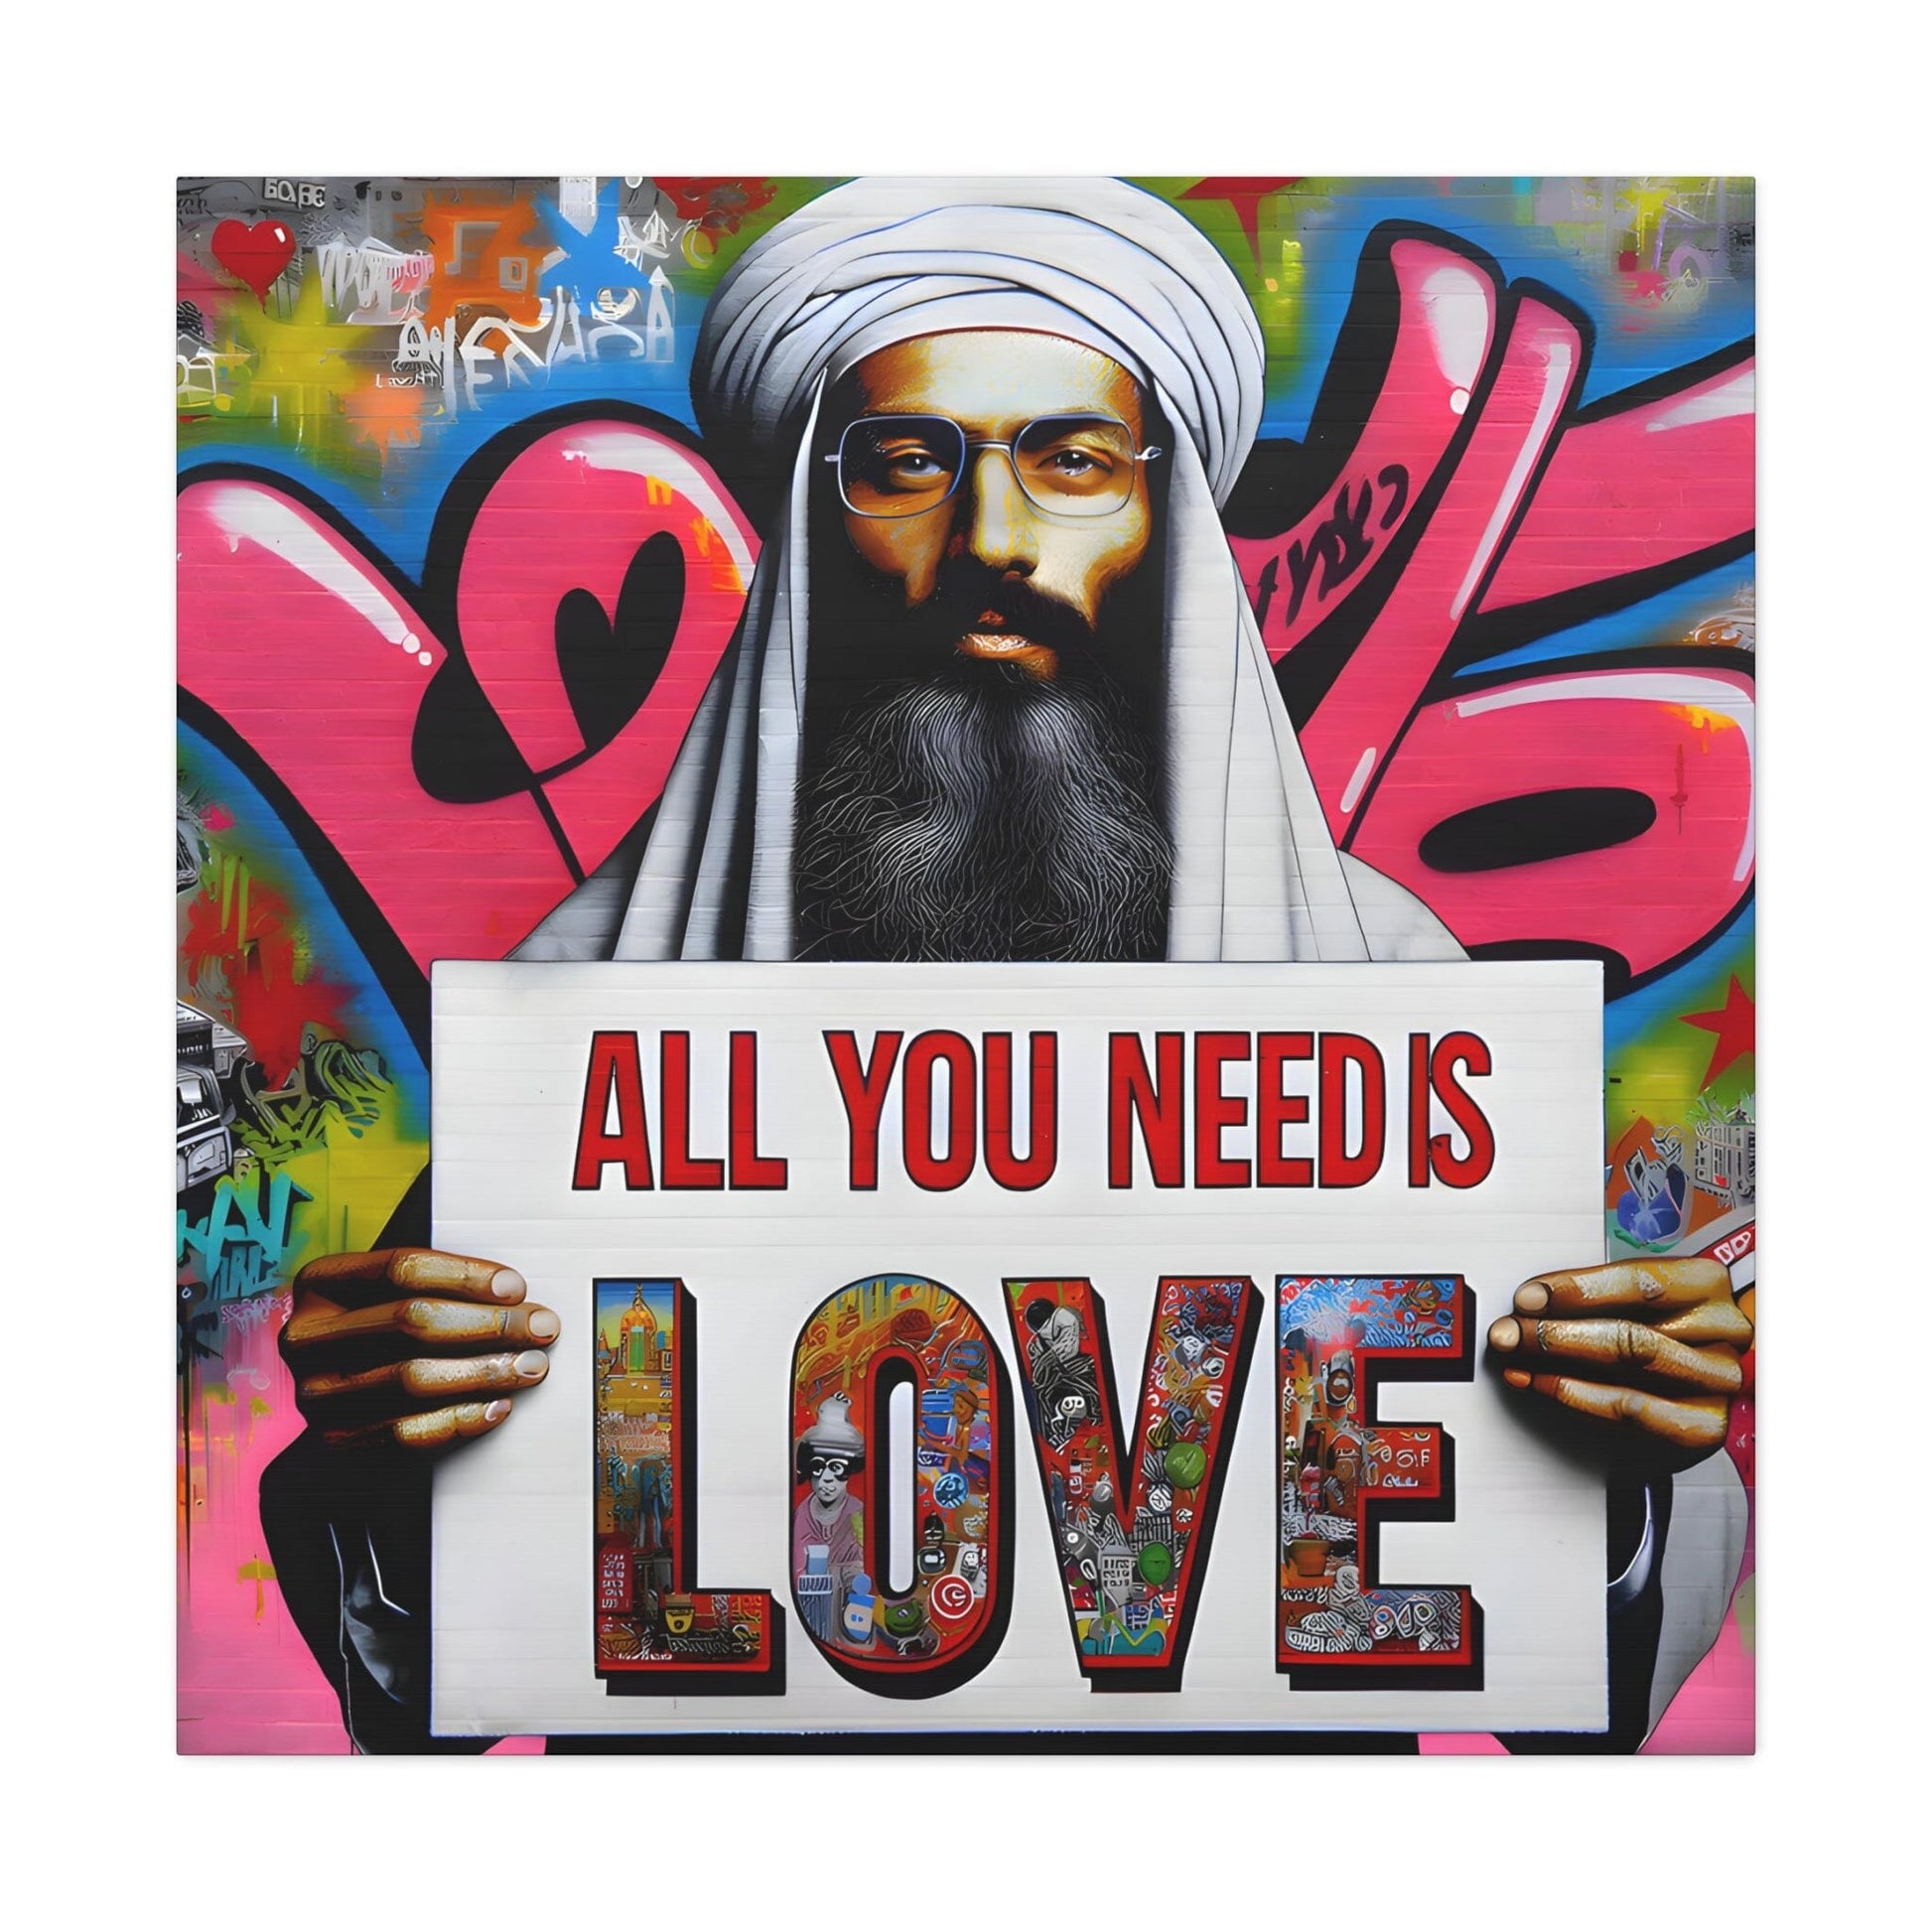 Julian Ardley. Islamic Icon of Amour. Exclusive Graphic Canvas Print.